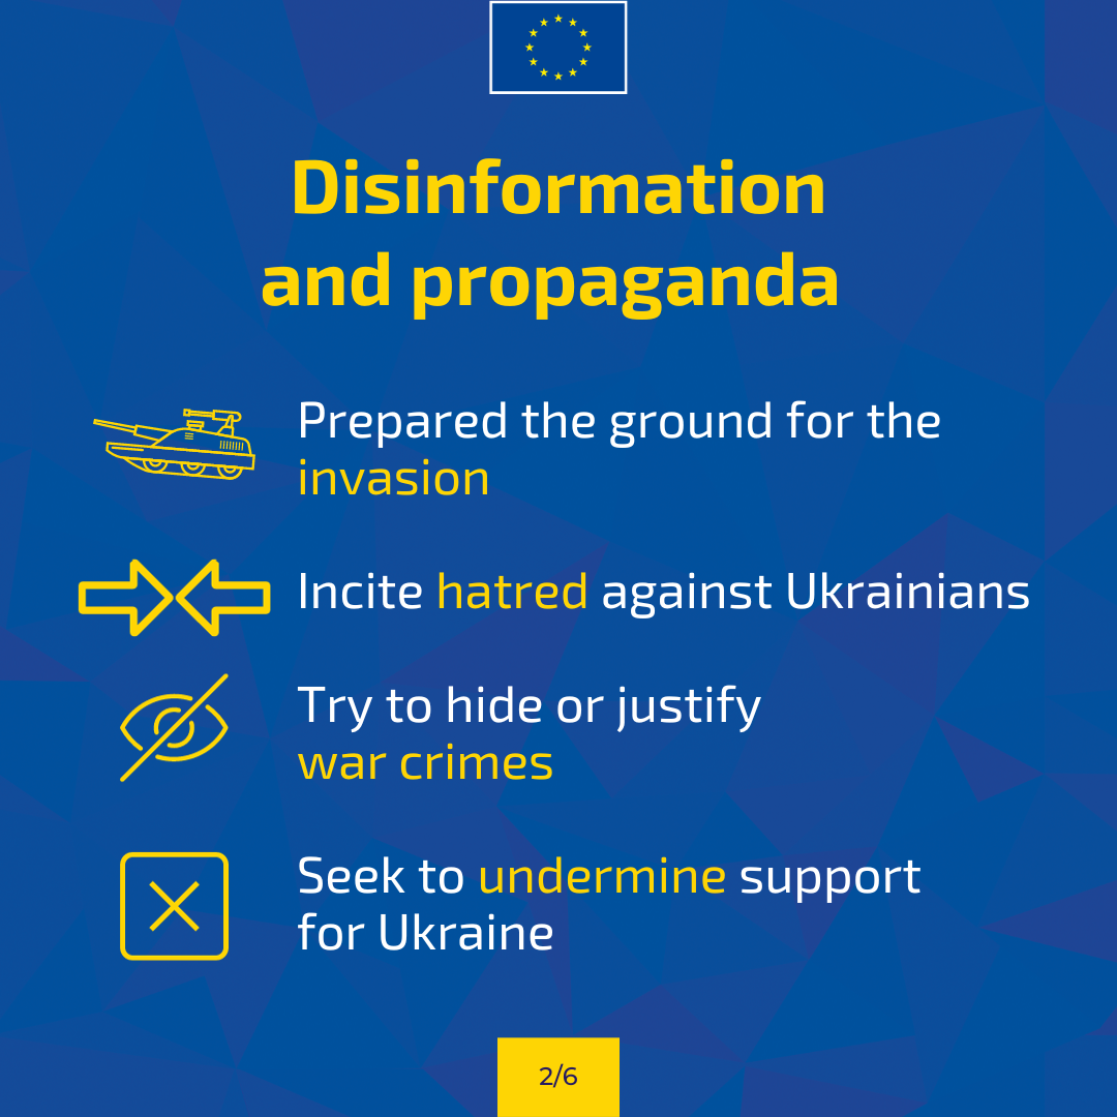 Disinformation and propaganda: prepared the ground for the invasion, incite hatred against Ukrainians, try to hide or justify war crimes, seek to undermine support for Ukraine